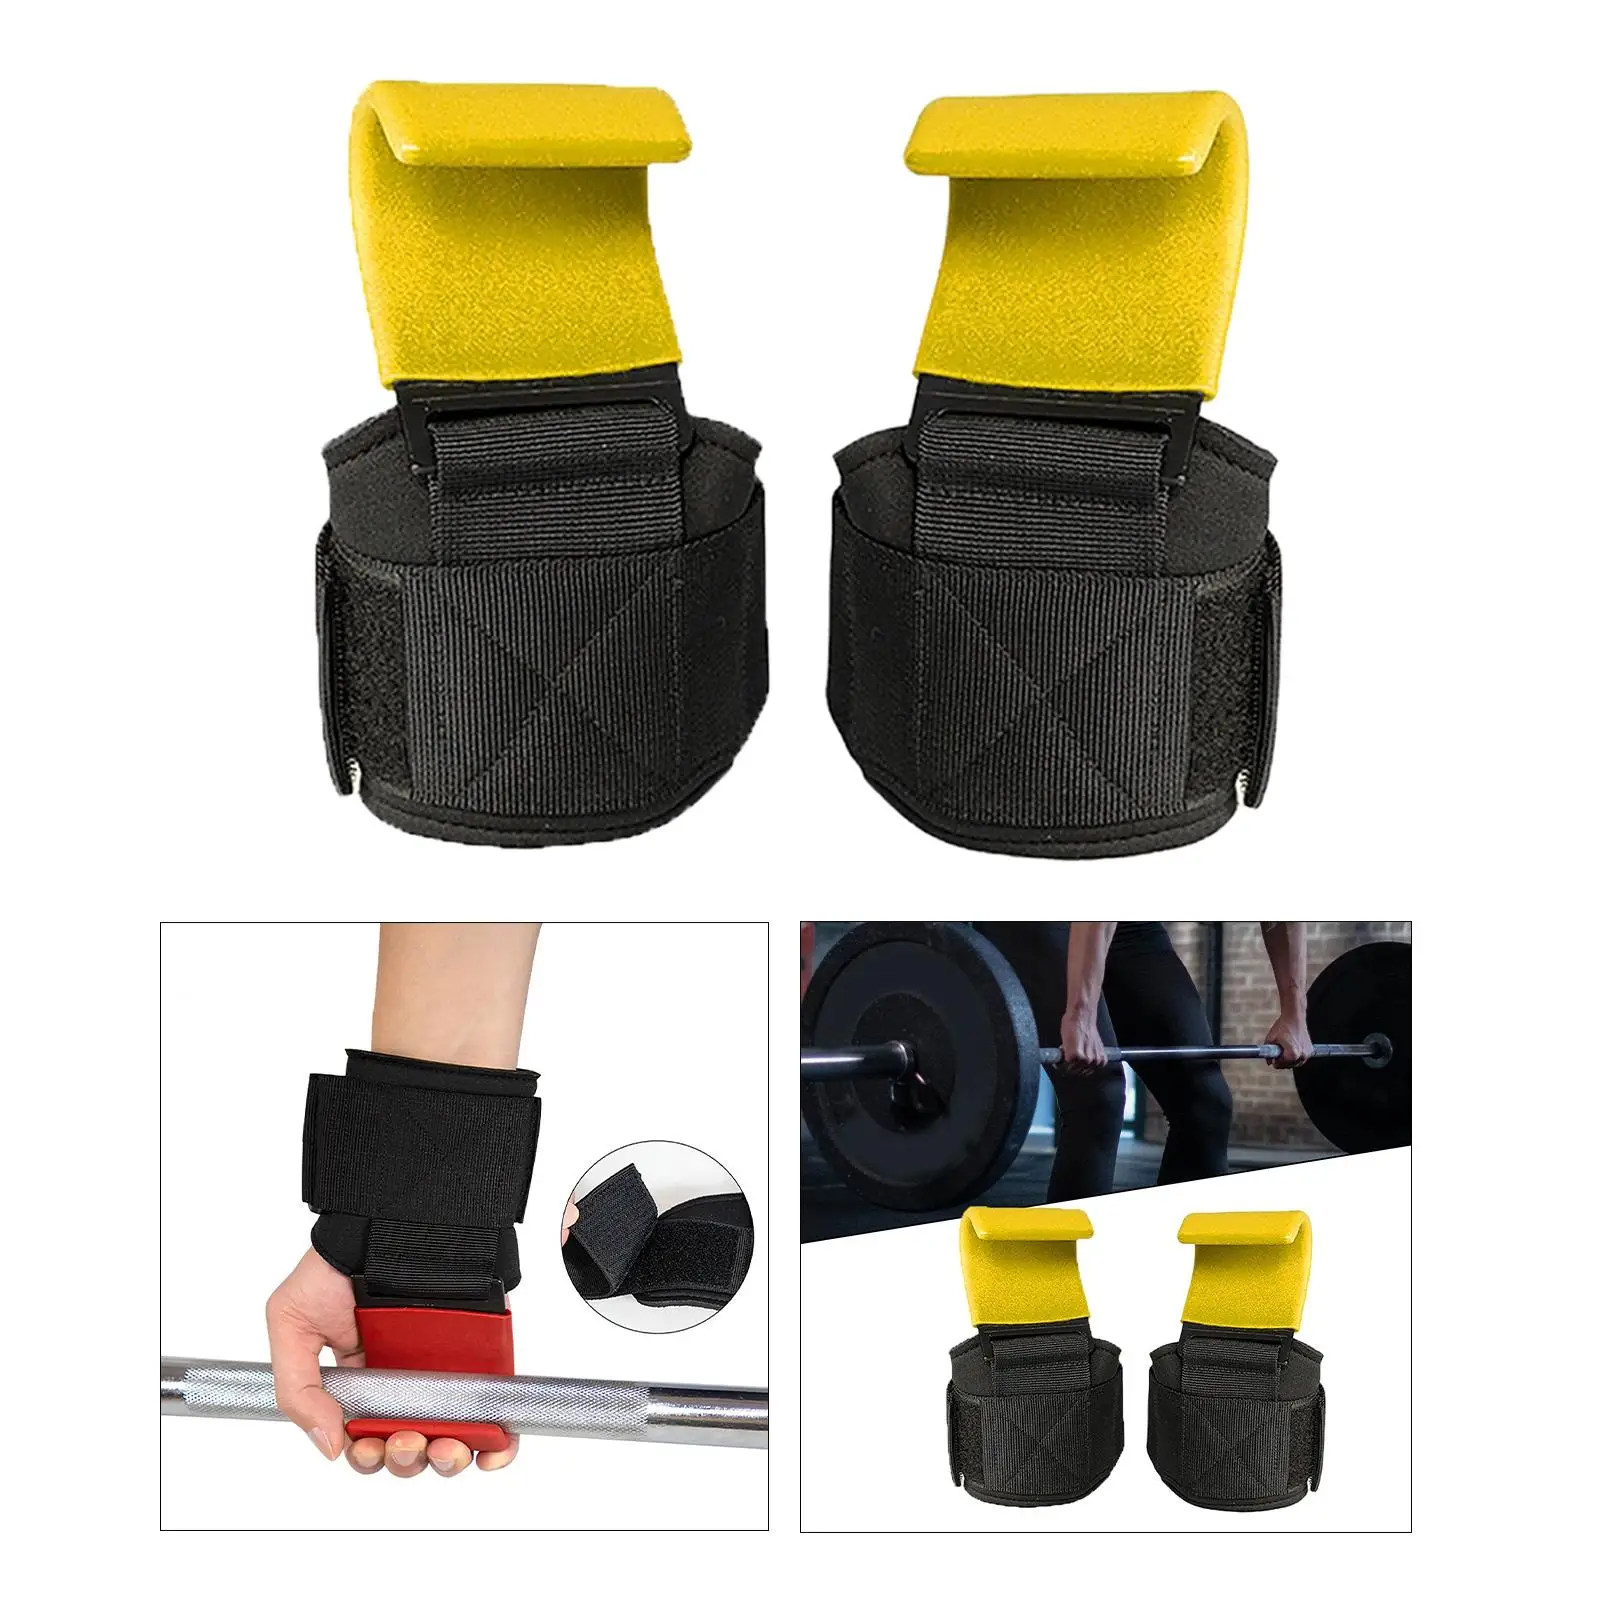 1 Pair Weight Lifting Hooks Wrist Wraps Gym Training Grip Straps for Fitness Padded Wrist Grips Bodybuilding Strength Training